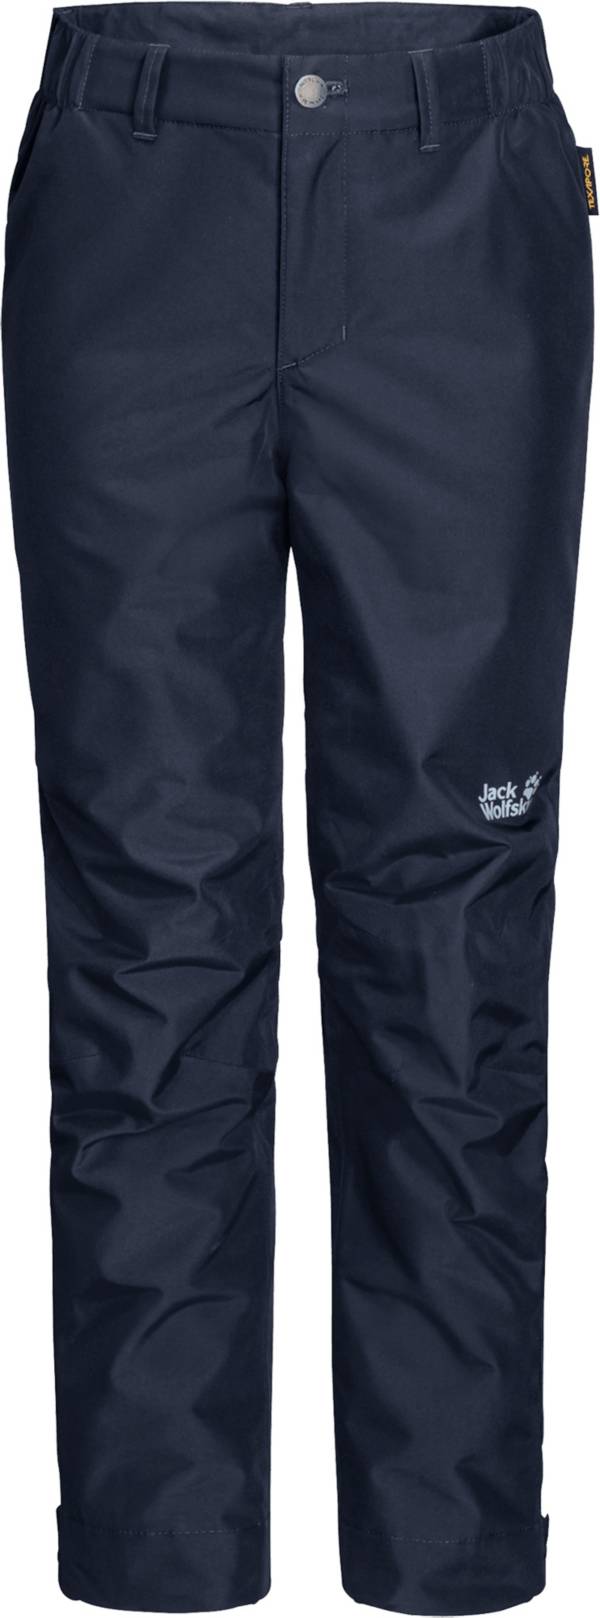 Jack Wolfskin Youth Snowy Days Pants product image